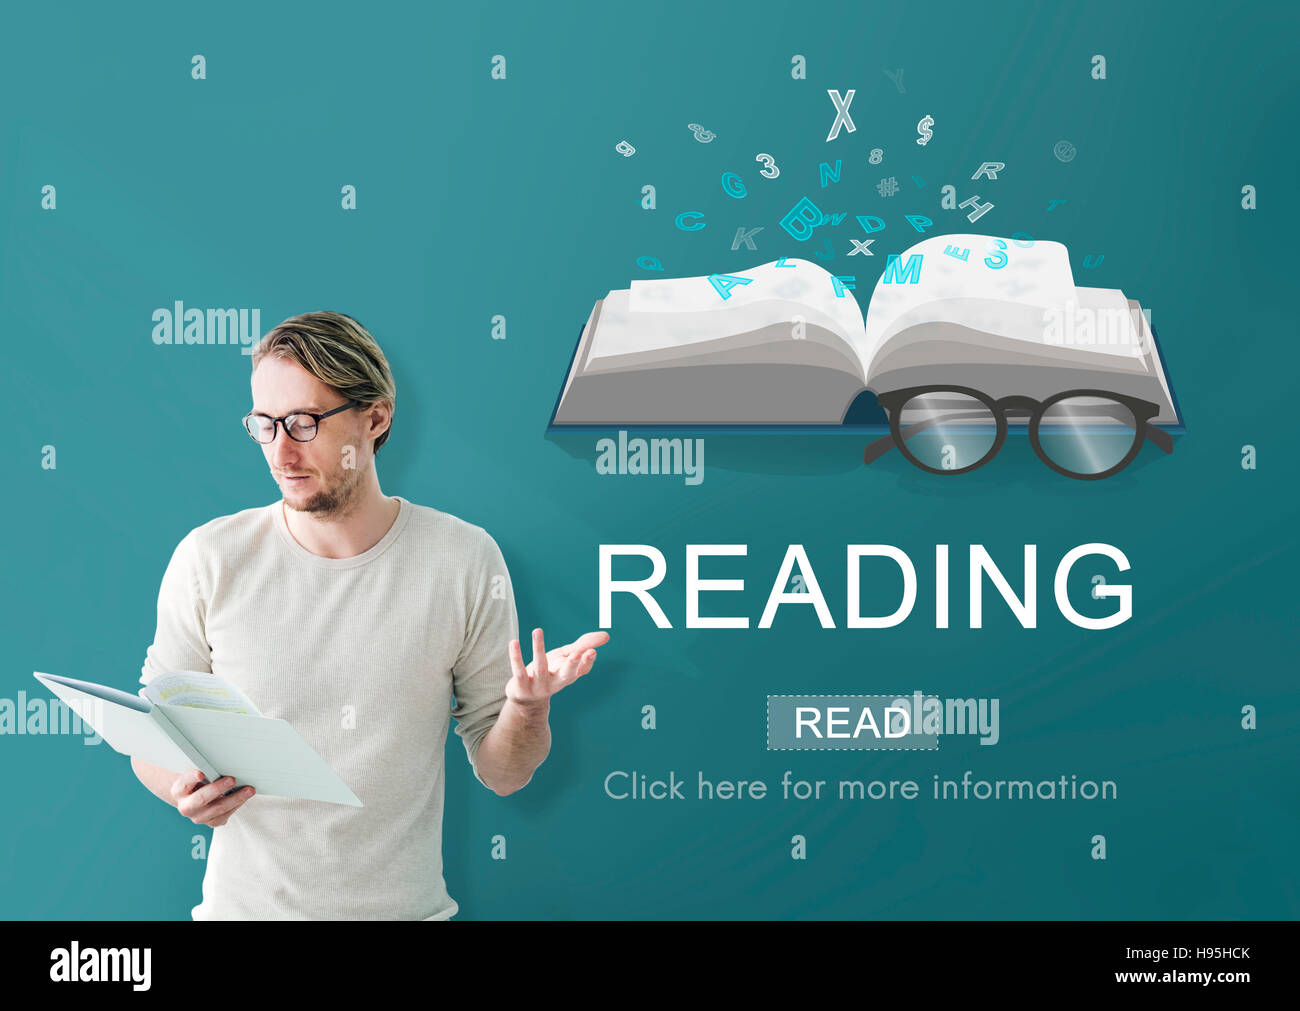 Reading Knowledge Intelligence Vision Solution Concept Stock Photo